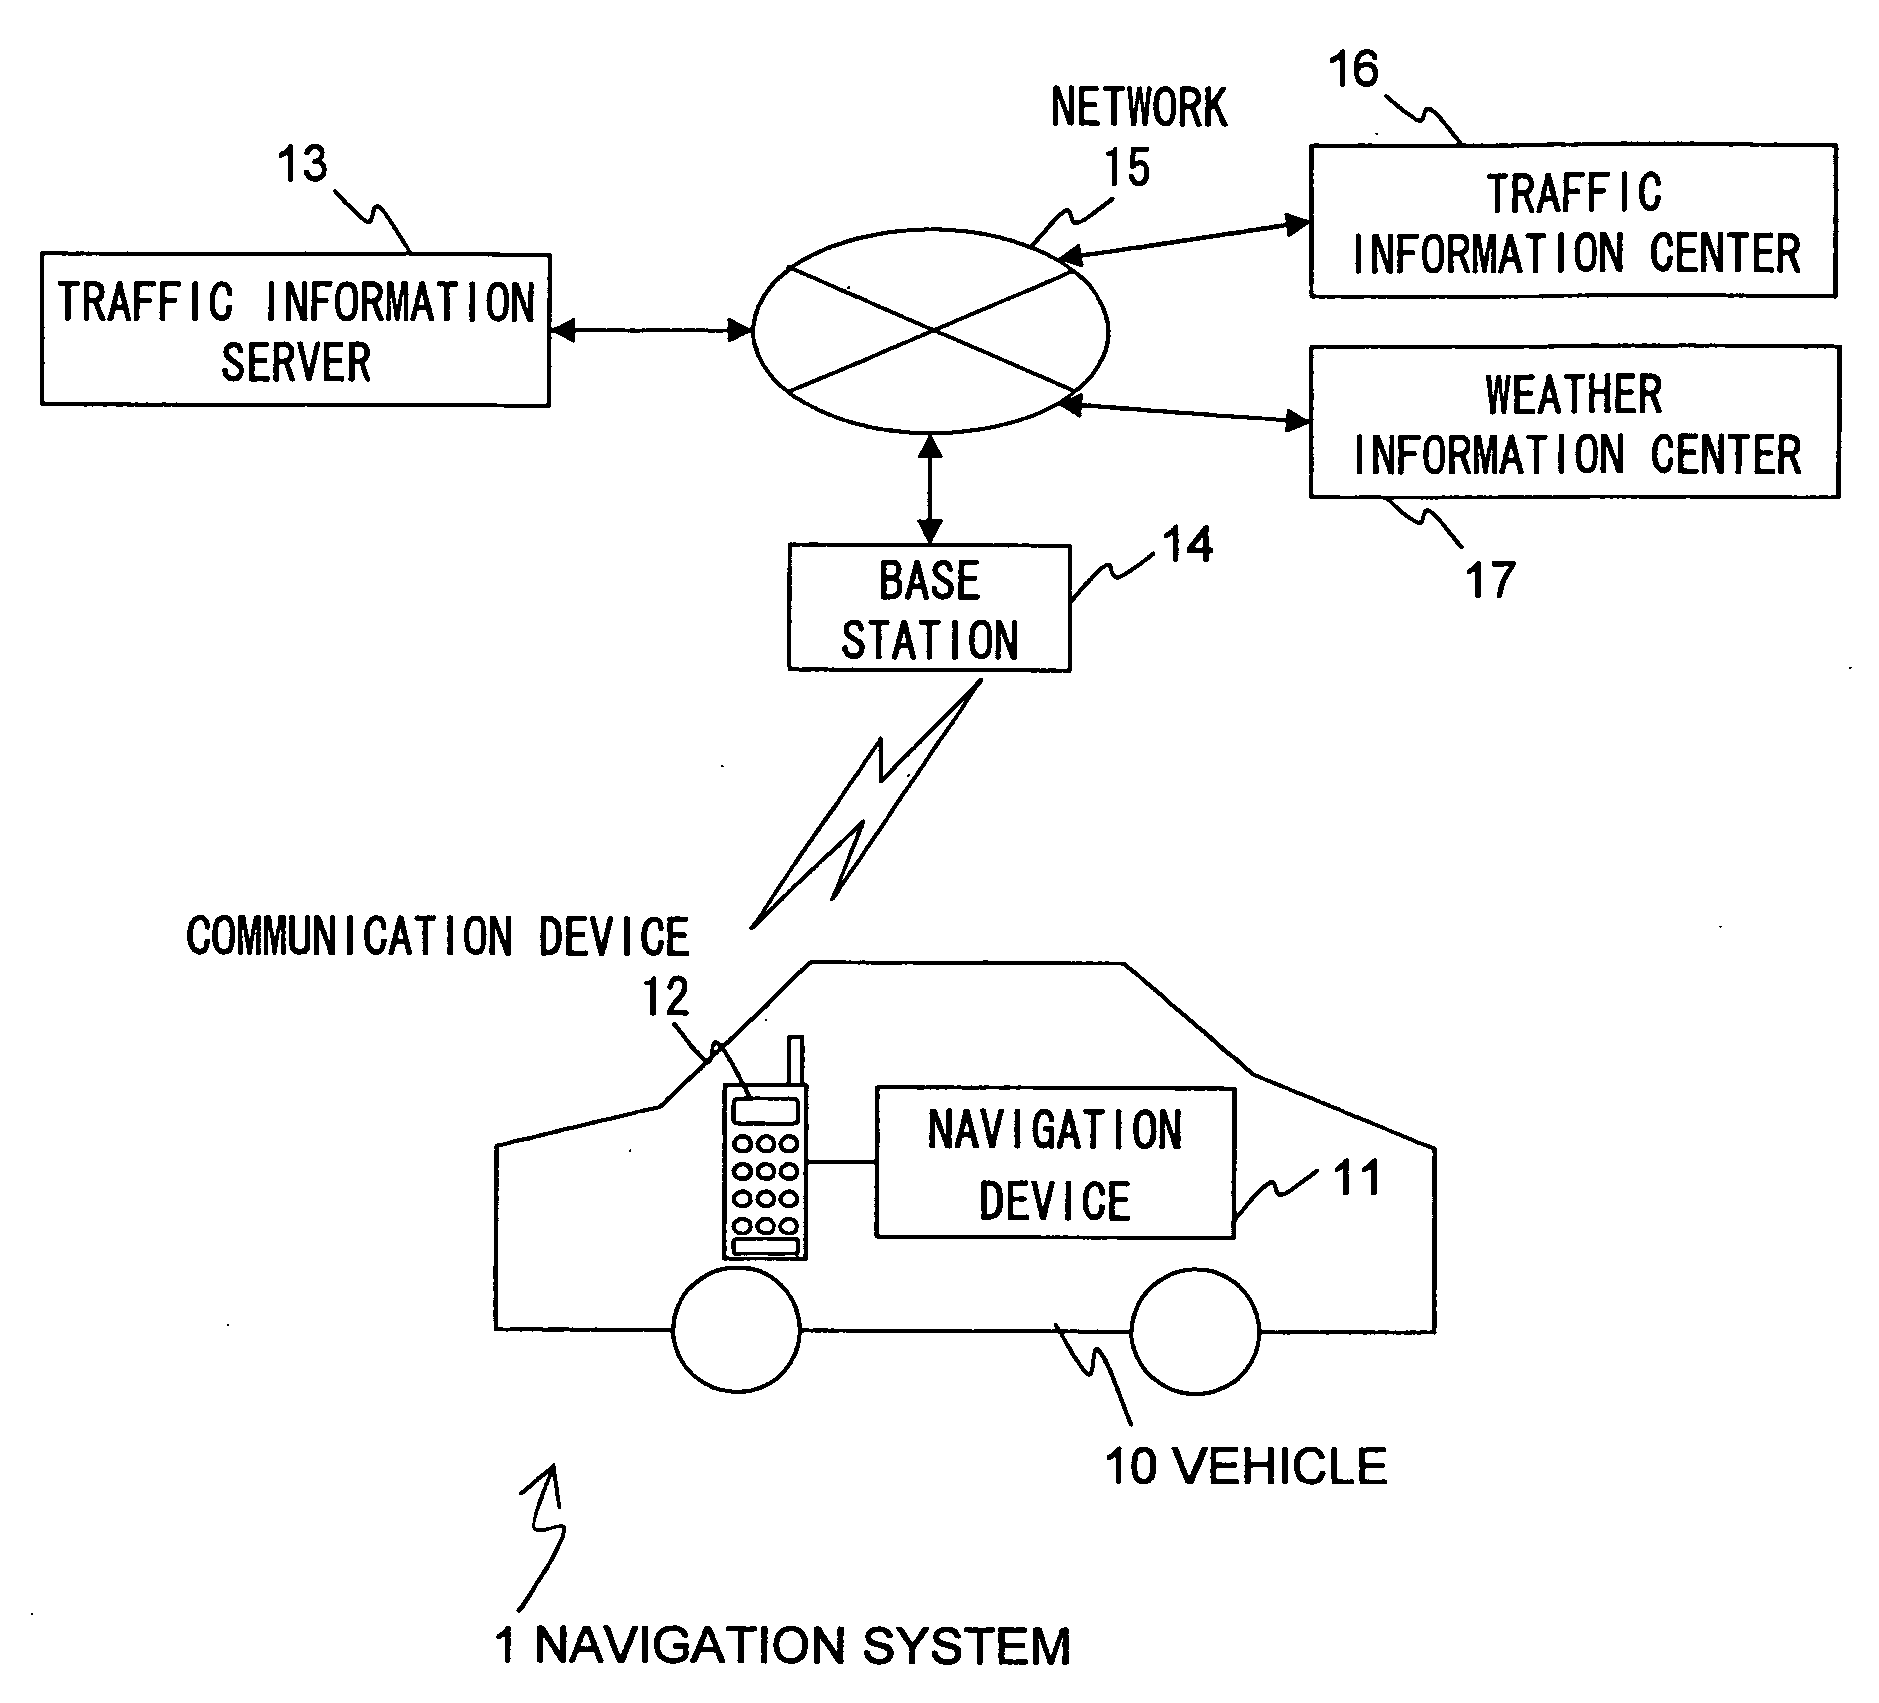 Method for displaying traffic information and navigation system